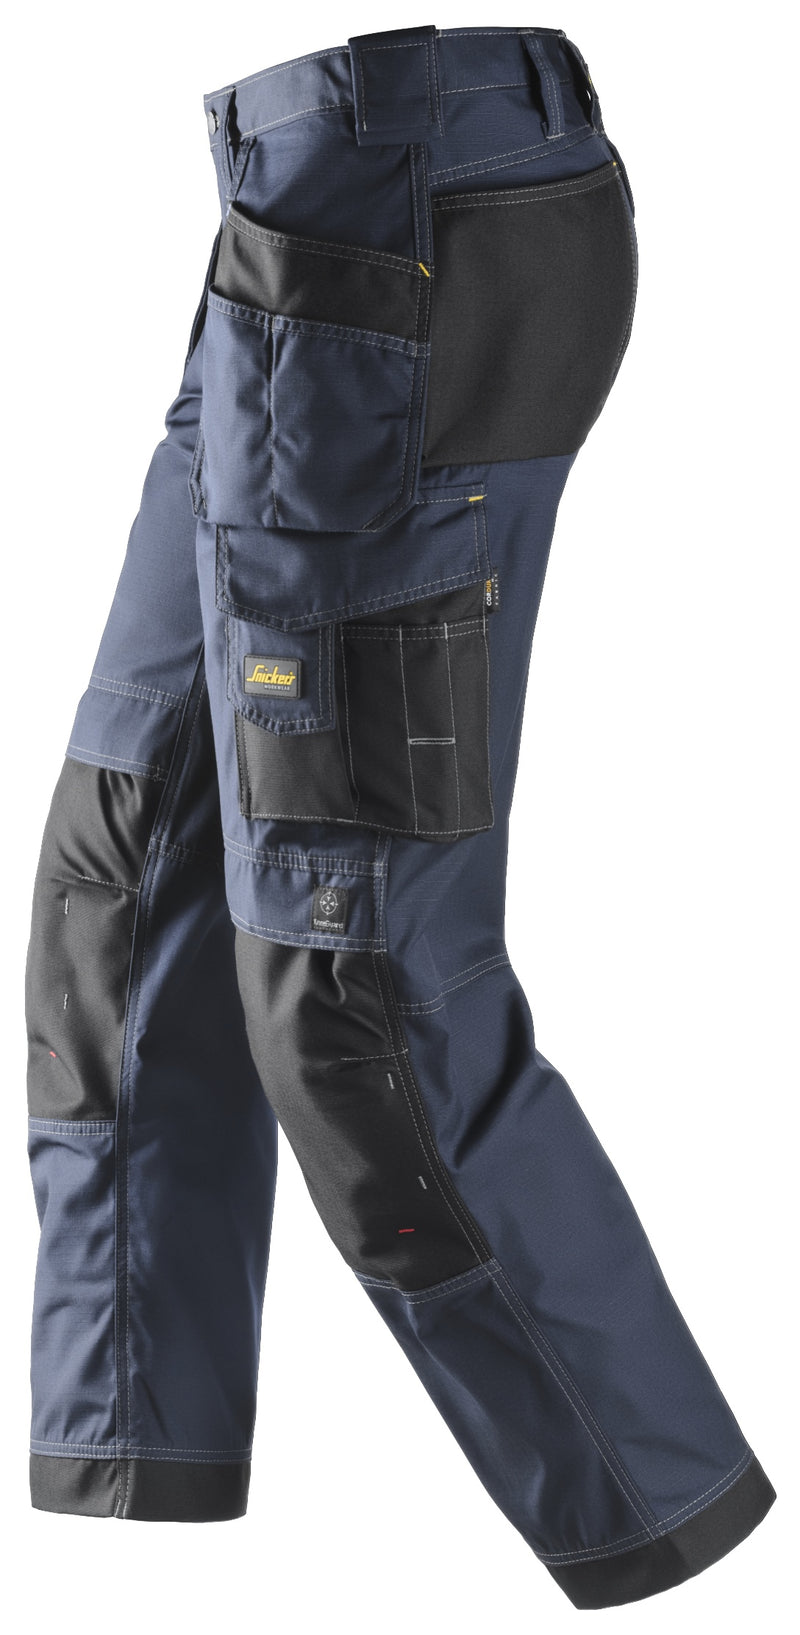 Snickers Craftsman Holster Pockets Trousers Rip-Stop, Navy/Black, Size 120